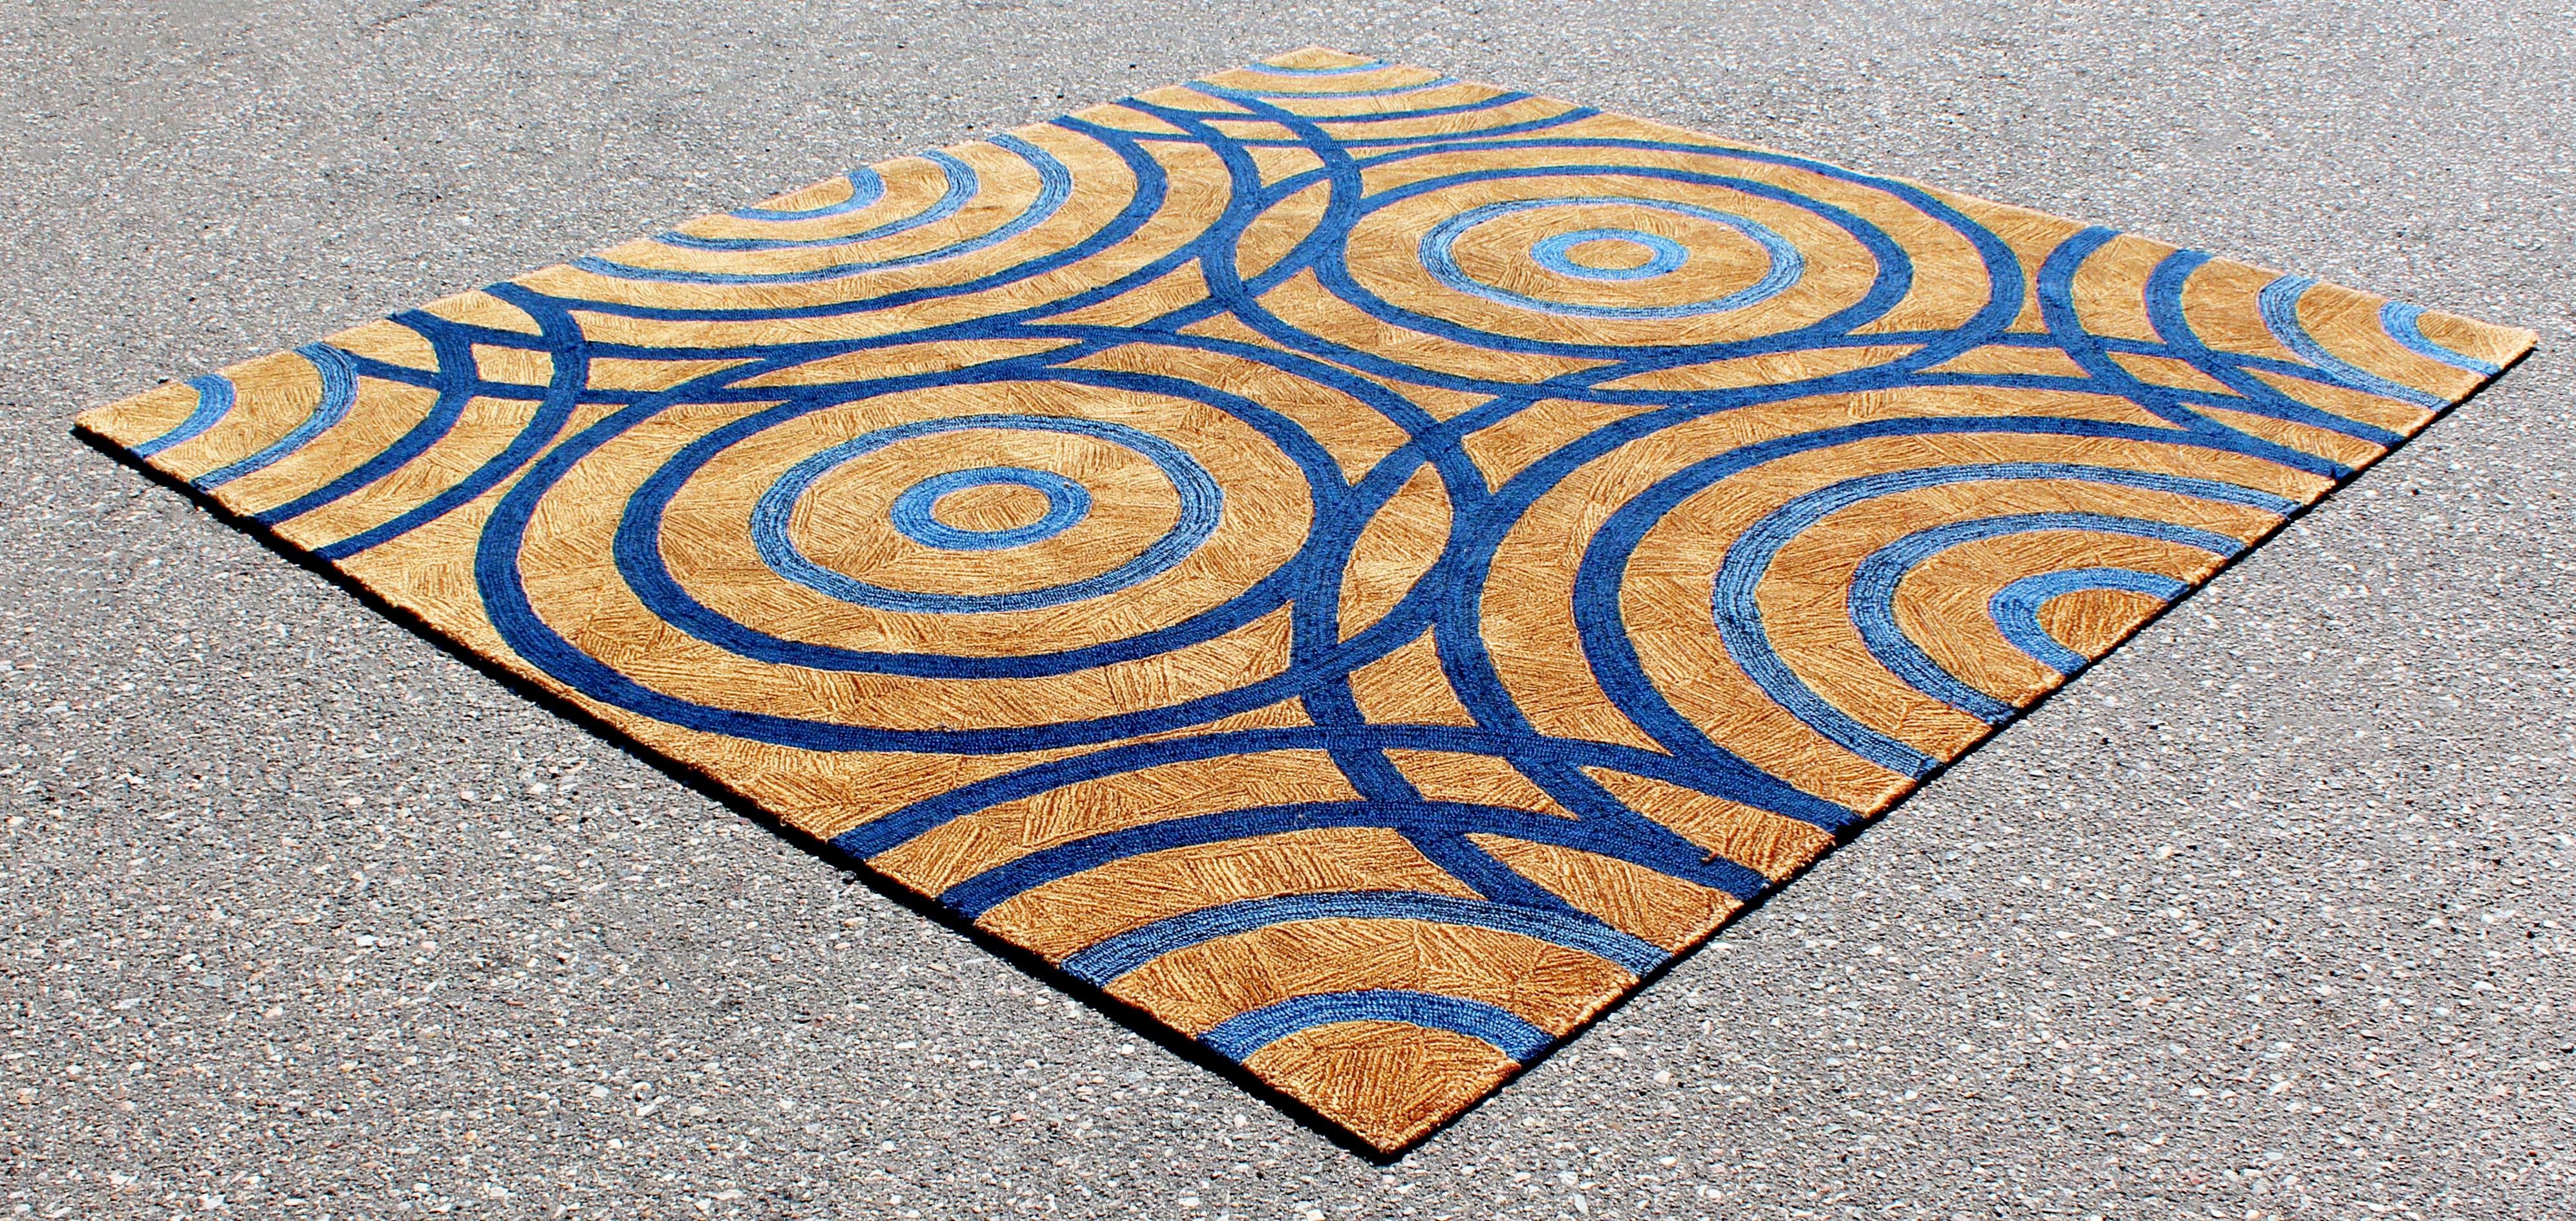 For your consideration is an impressive, 100% wool area rug or carpet, with a geometric brown and blue pattern, signed by Edward Fields, circa 1999. In excellent condition. The dimensions are 97